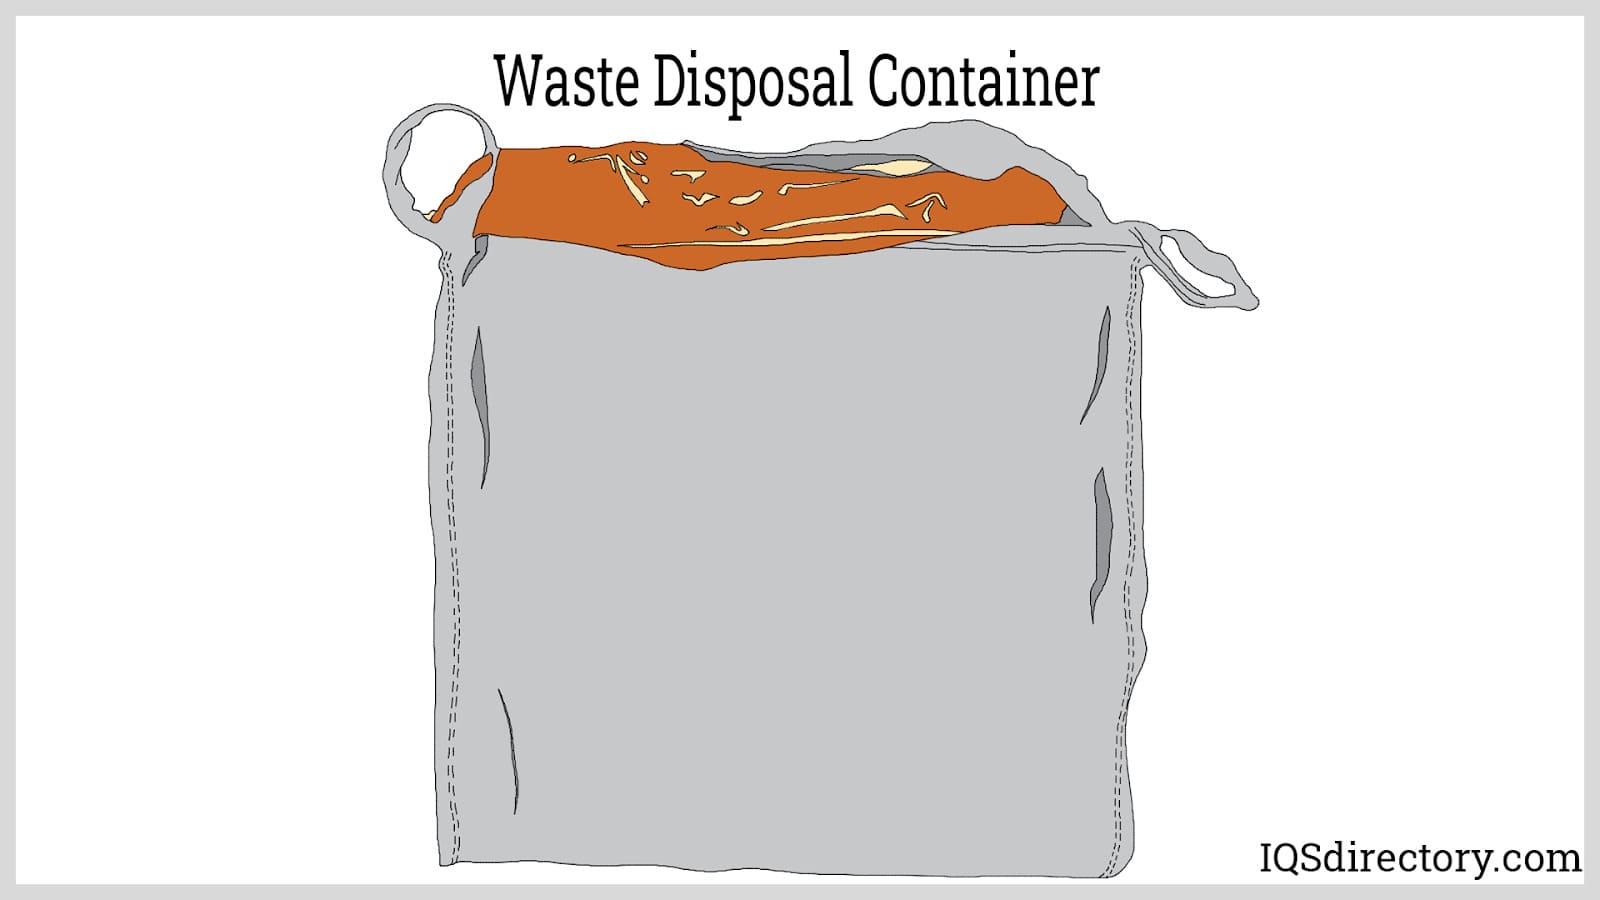 https://www.iqsdirectory.com/articles/plastic-container/waste-disposal-container.jpg